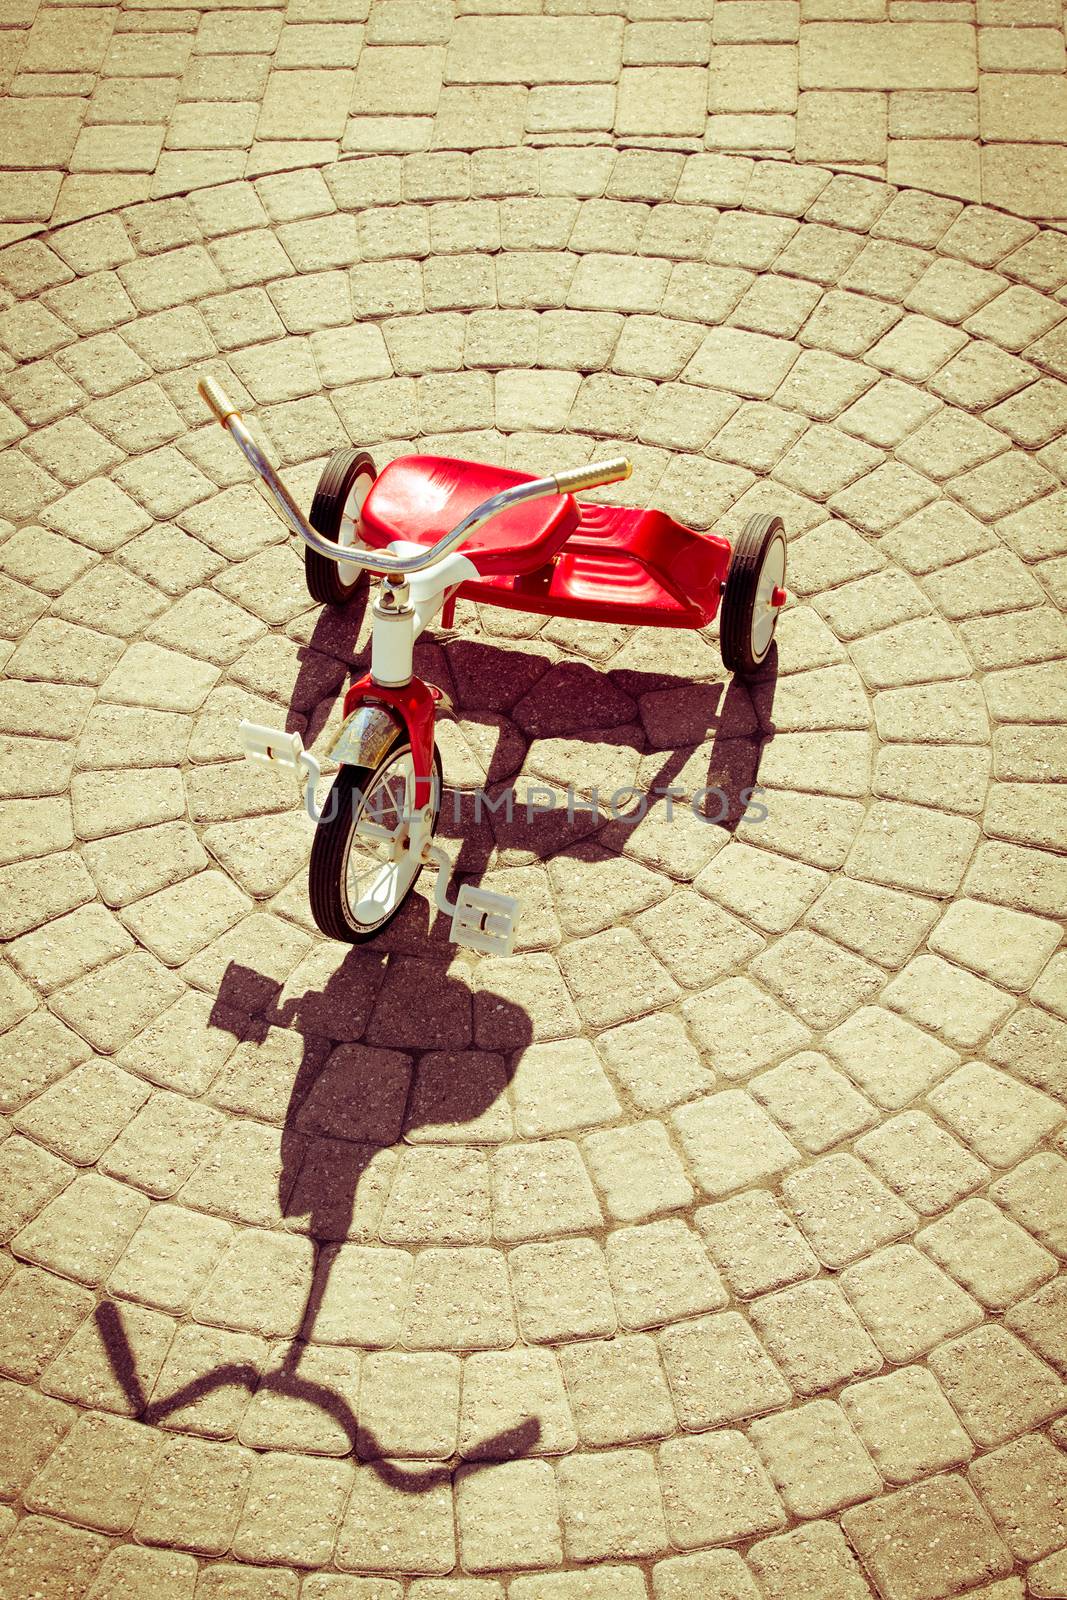 High Angle View of Red Vintage Tricycle in Bright Sunshine Casting Strong Shadow on Patio Stones Arranged in Circular Pattern Outdoors on Summer Day